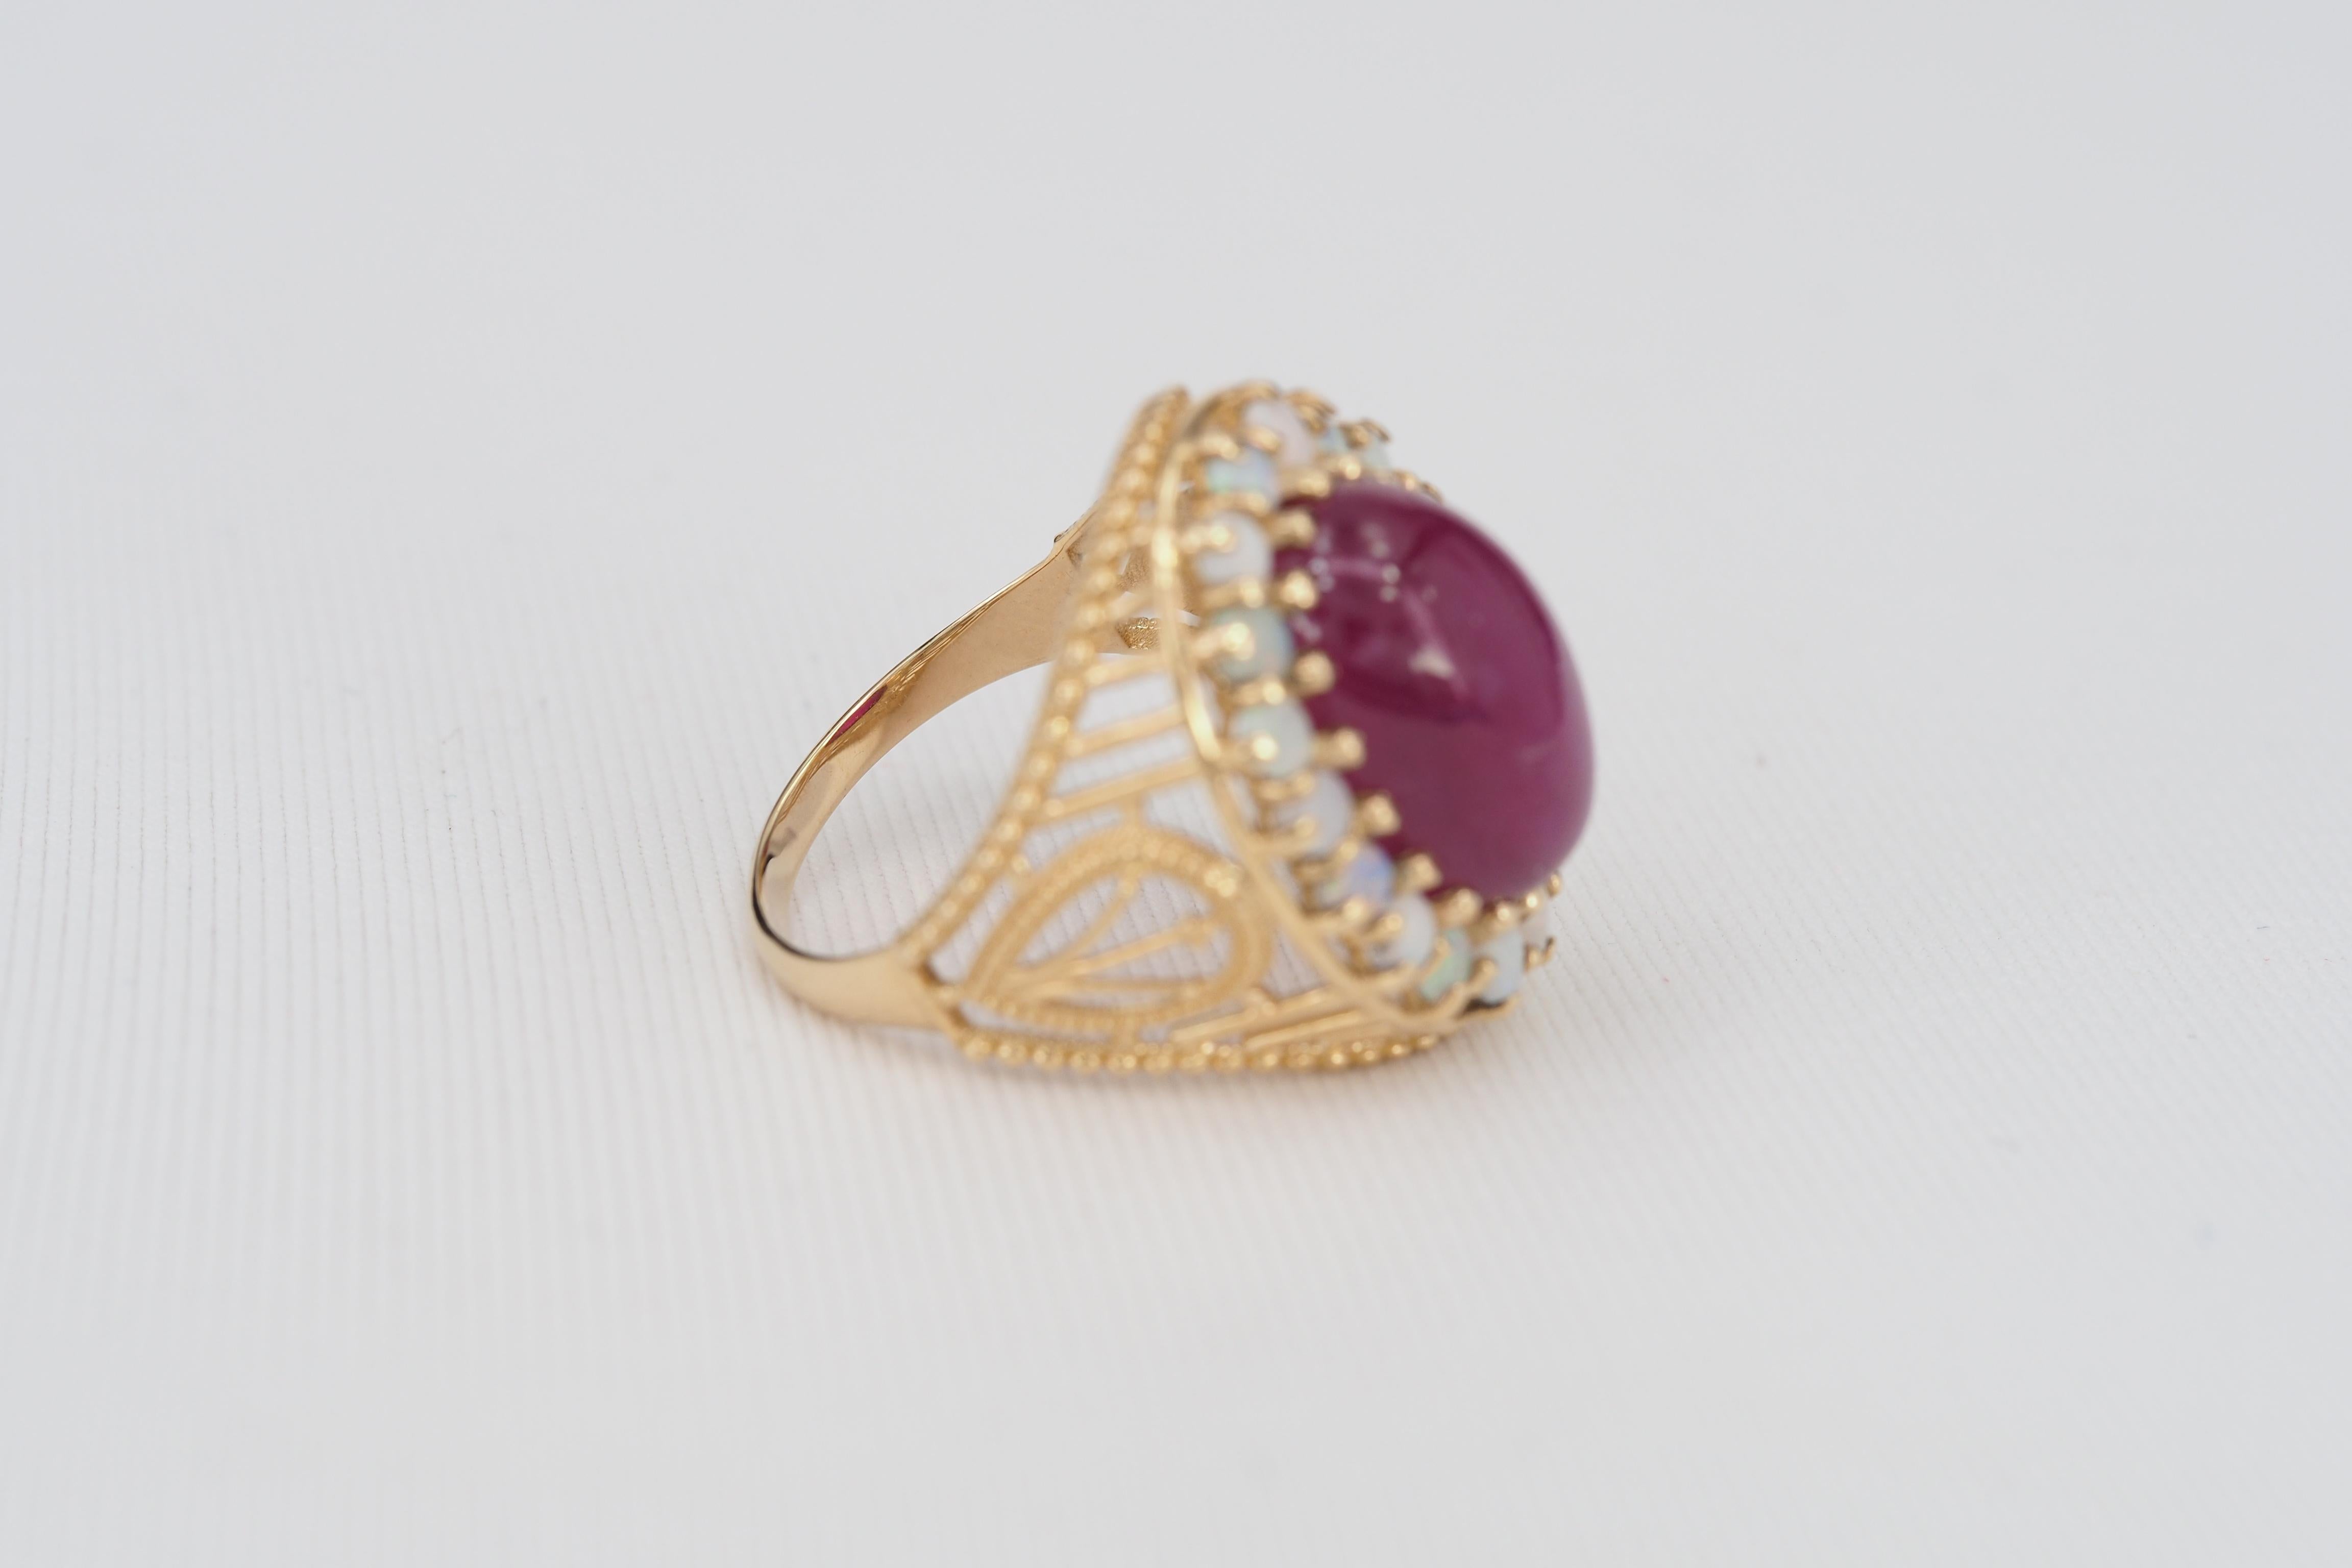 For Sale:  14k Massive Gold Ring with Cabochon Ruby and Opals, Vintage Inspired Ring 10